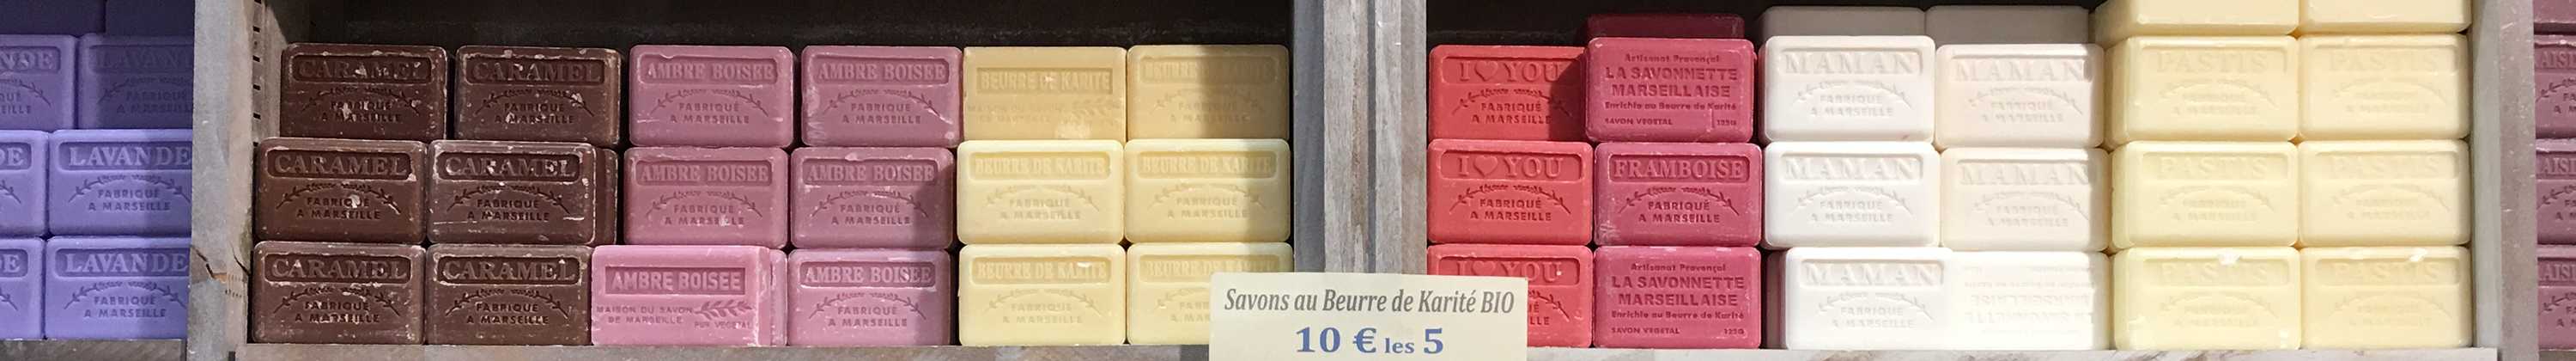 Colorful soaps display in Aix